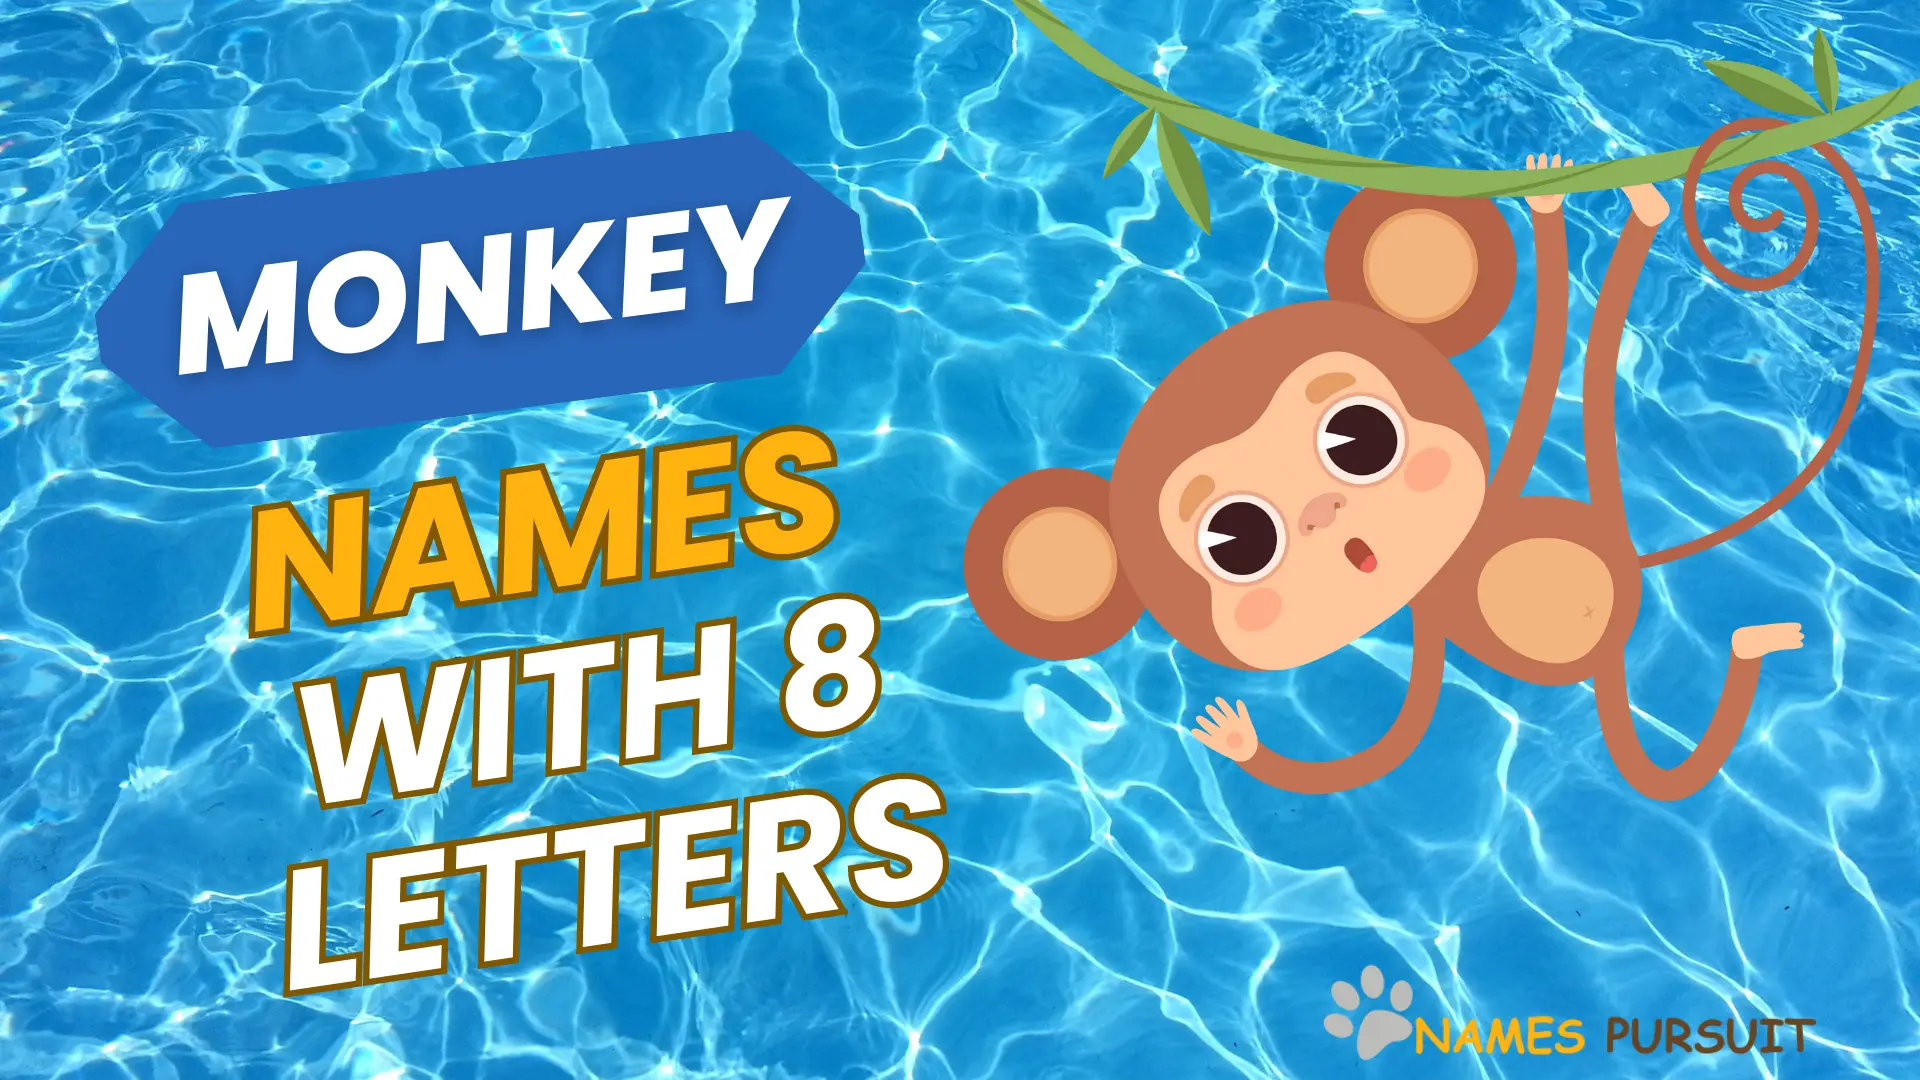 Monkey Names with 8-Letter